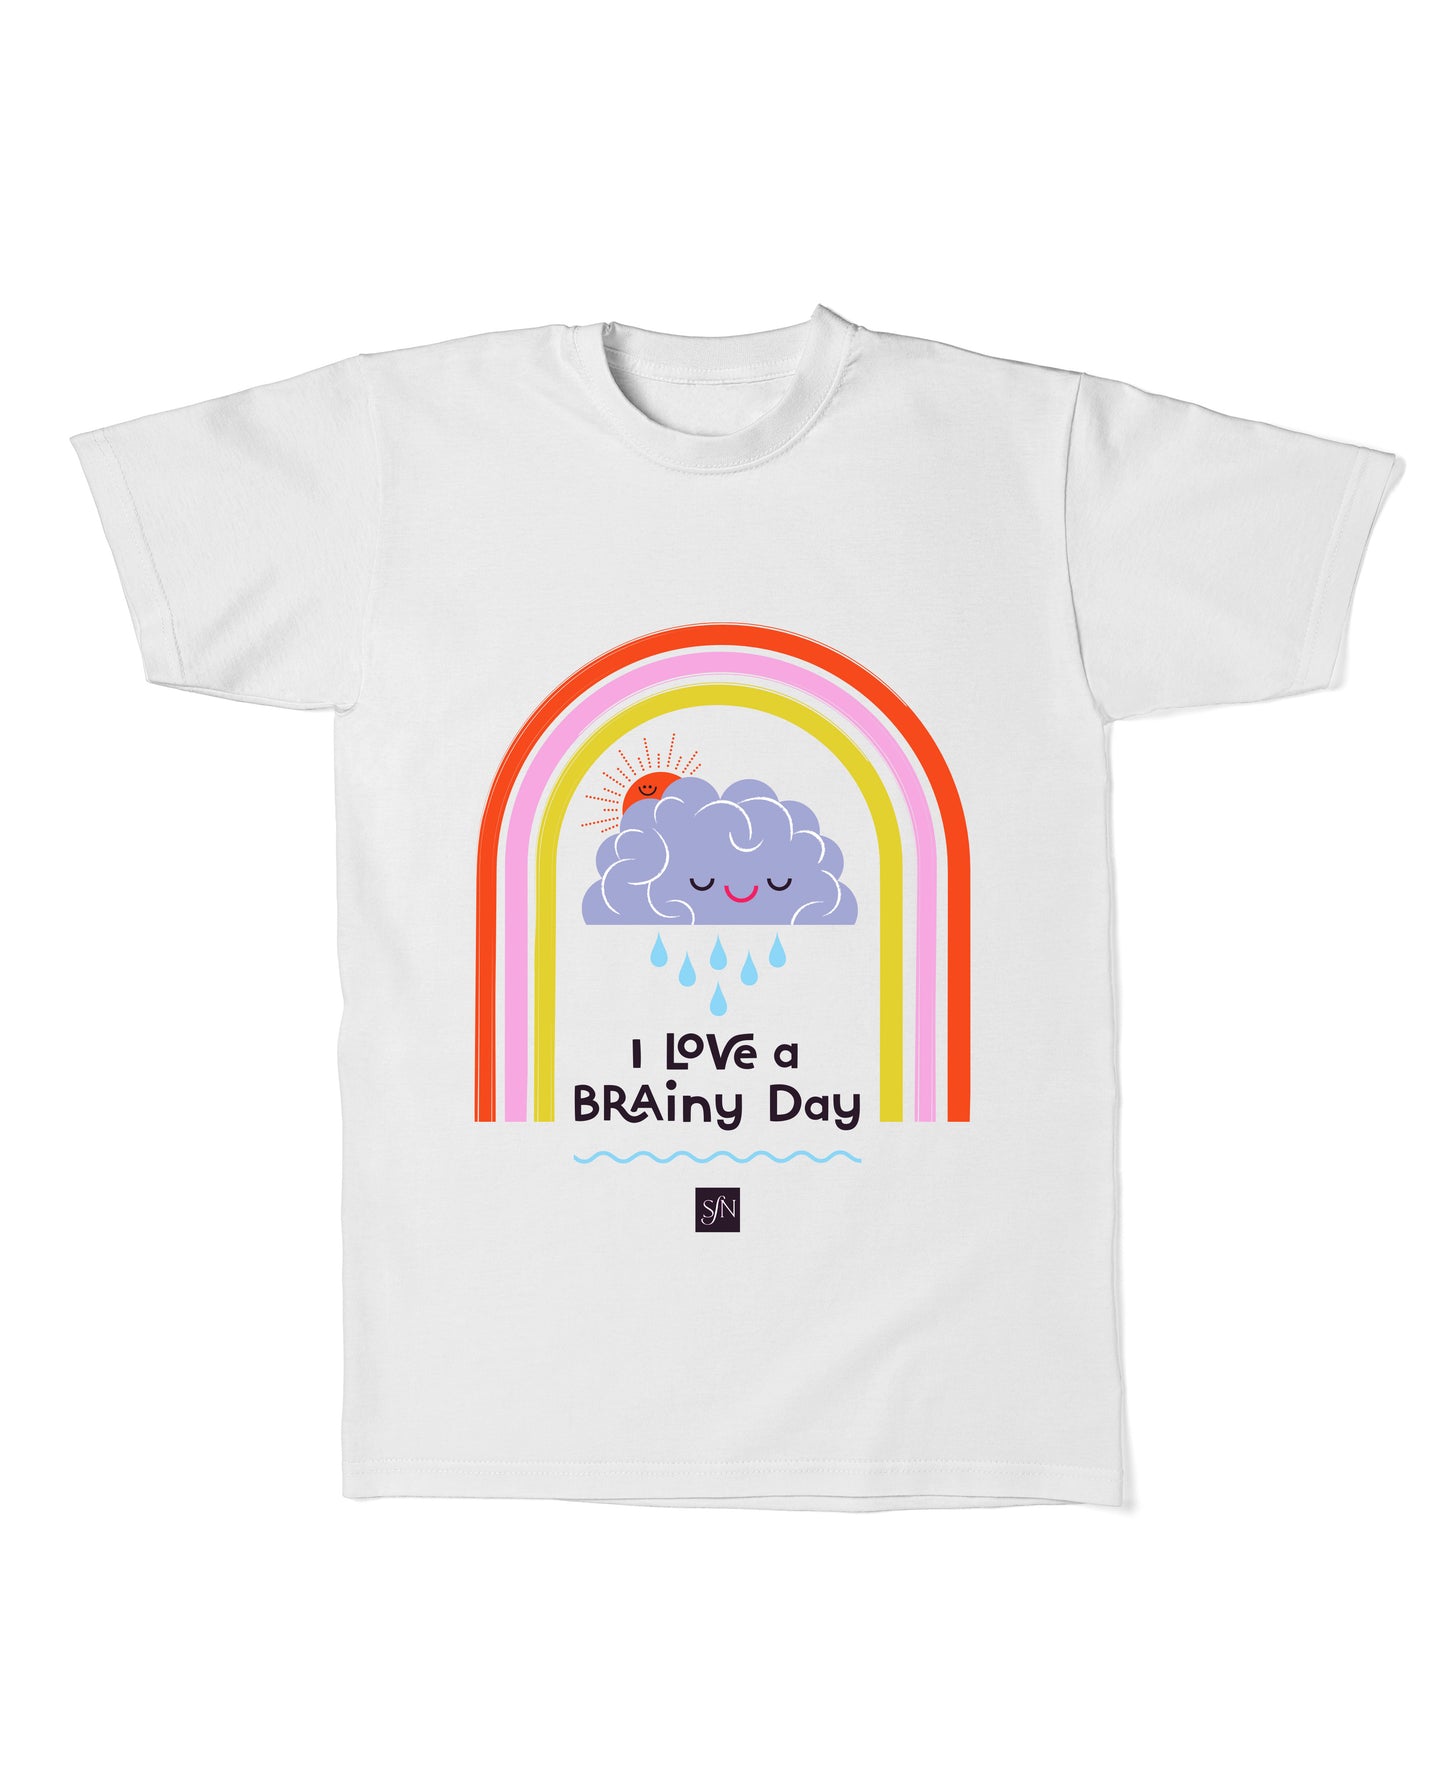 I Love a Brainy Day Toddler T-shirt